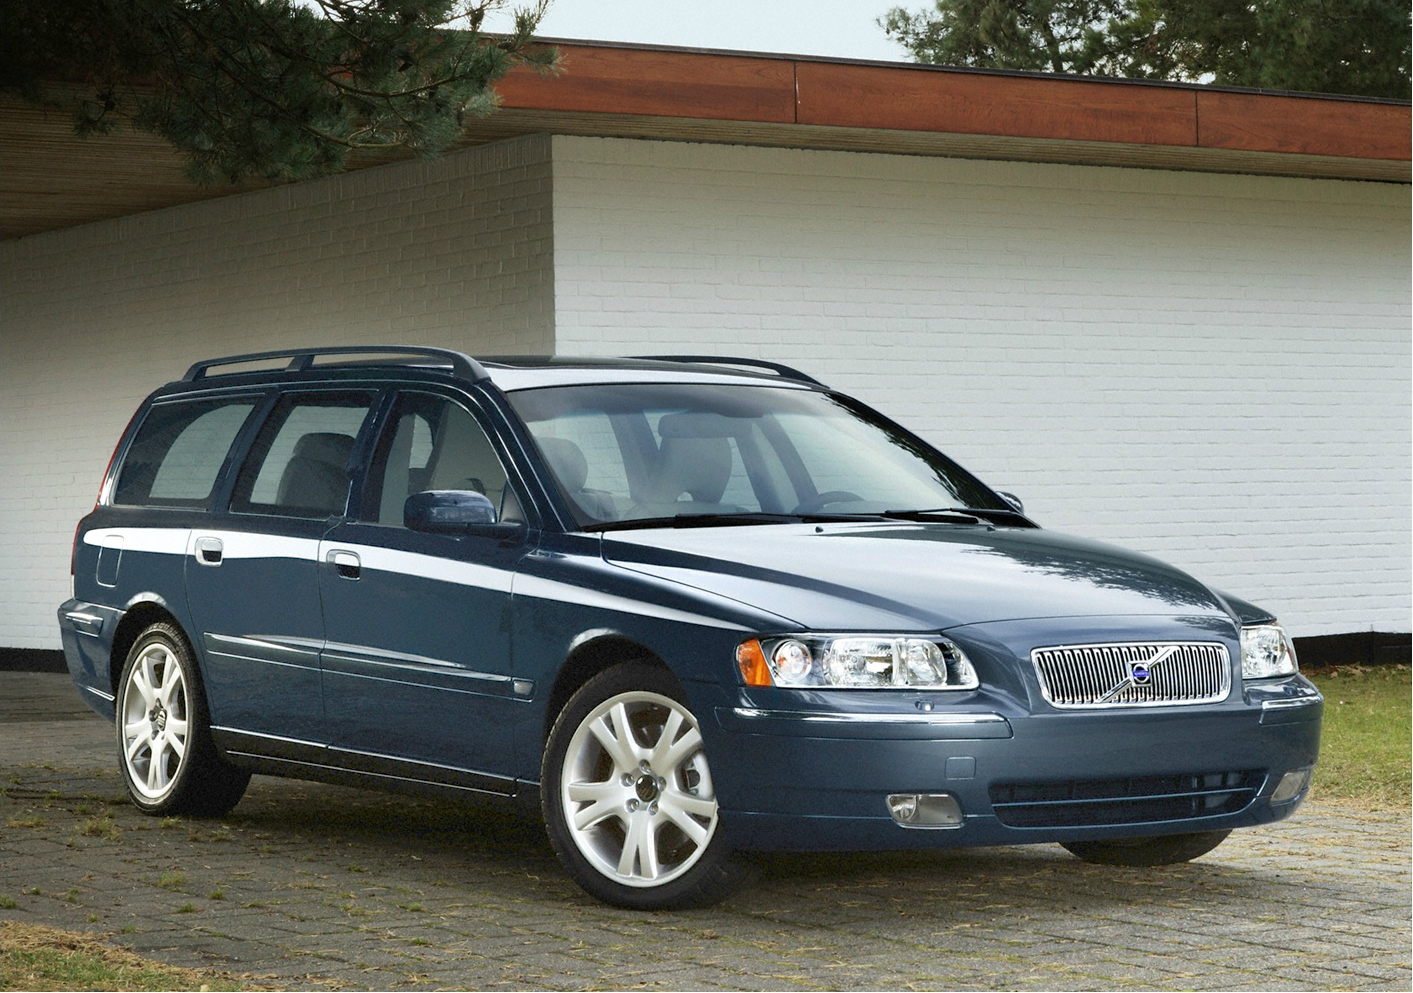 The Volvo V70 T5 isn't just a practical estate car, but a fast one too